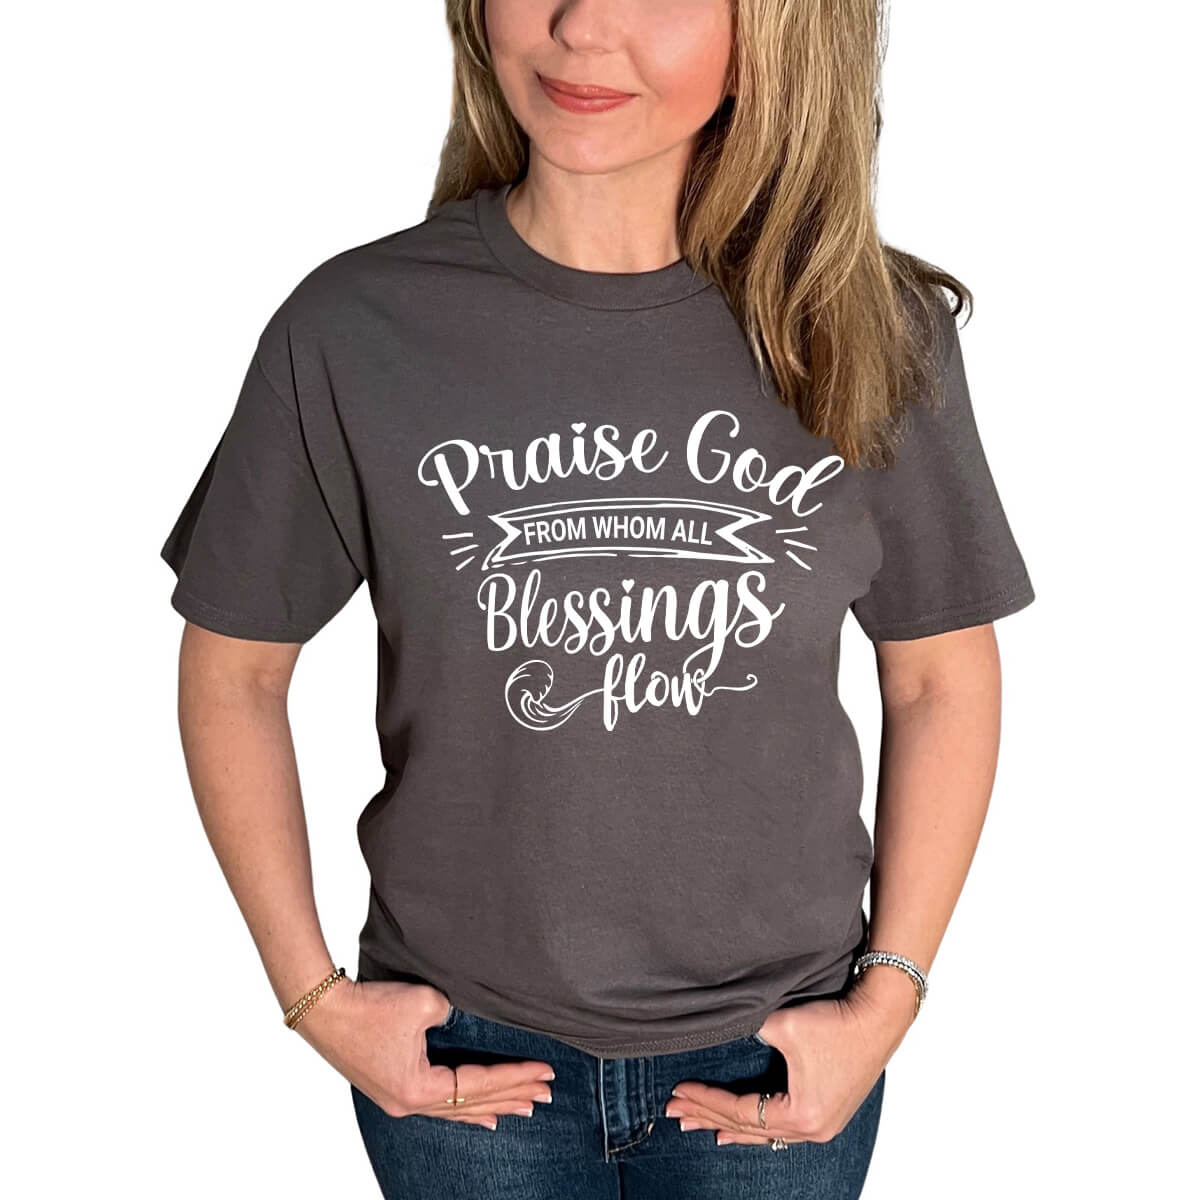 Praise God From Whom All Blessings Flow T-Shirt